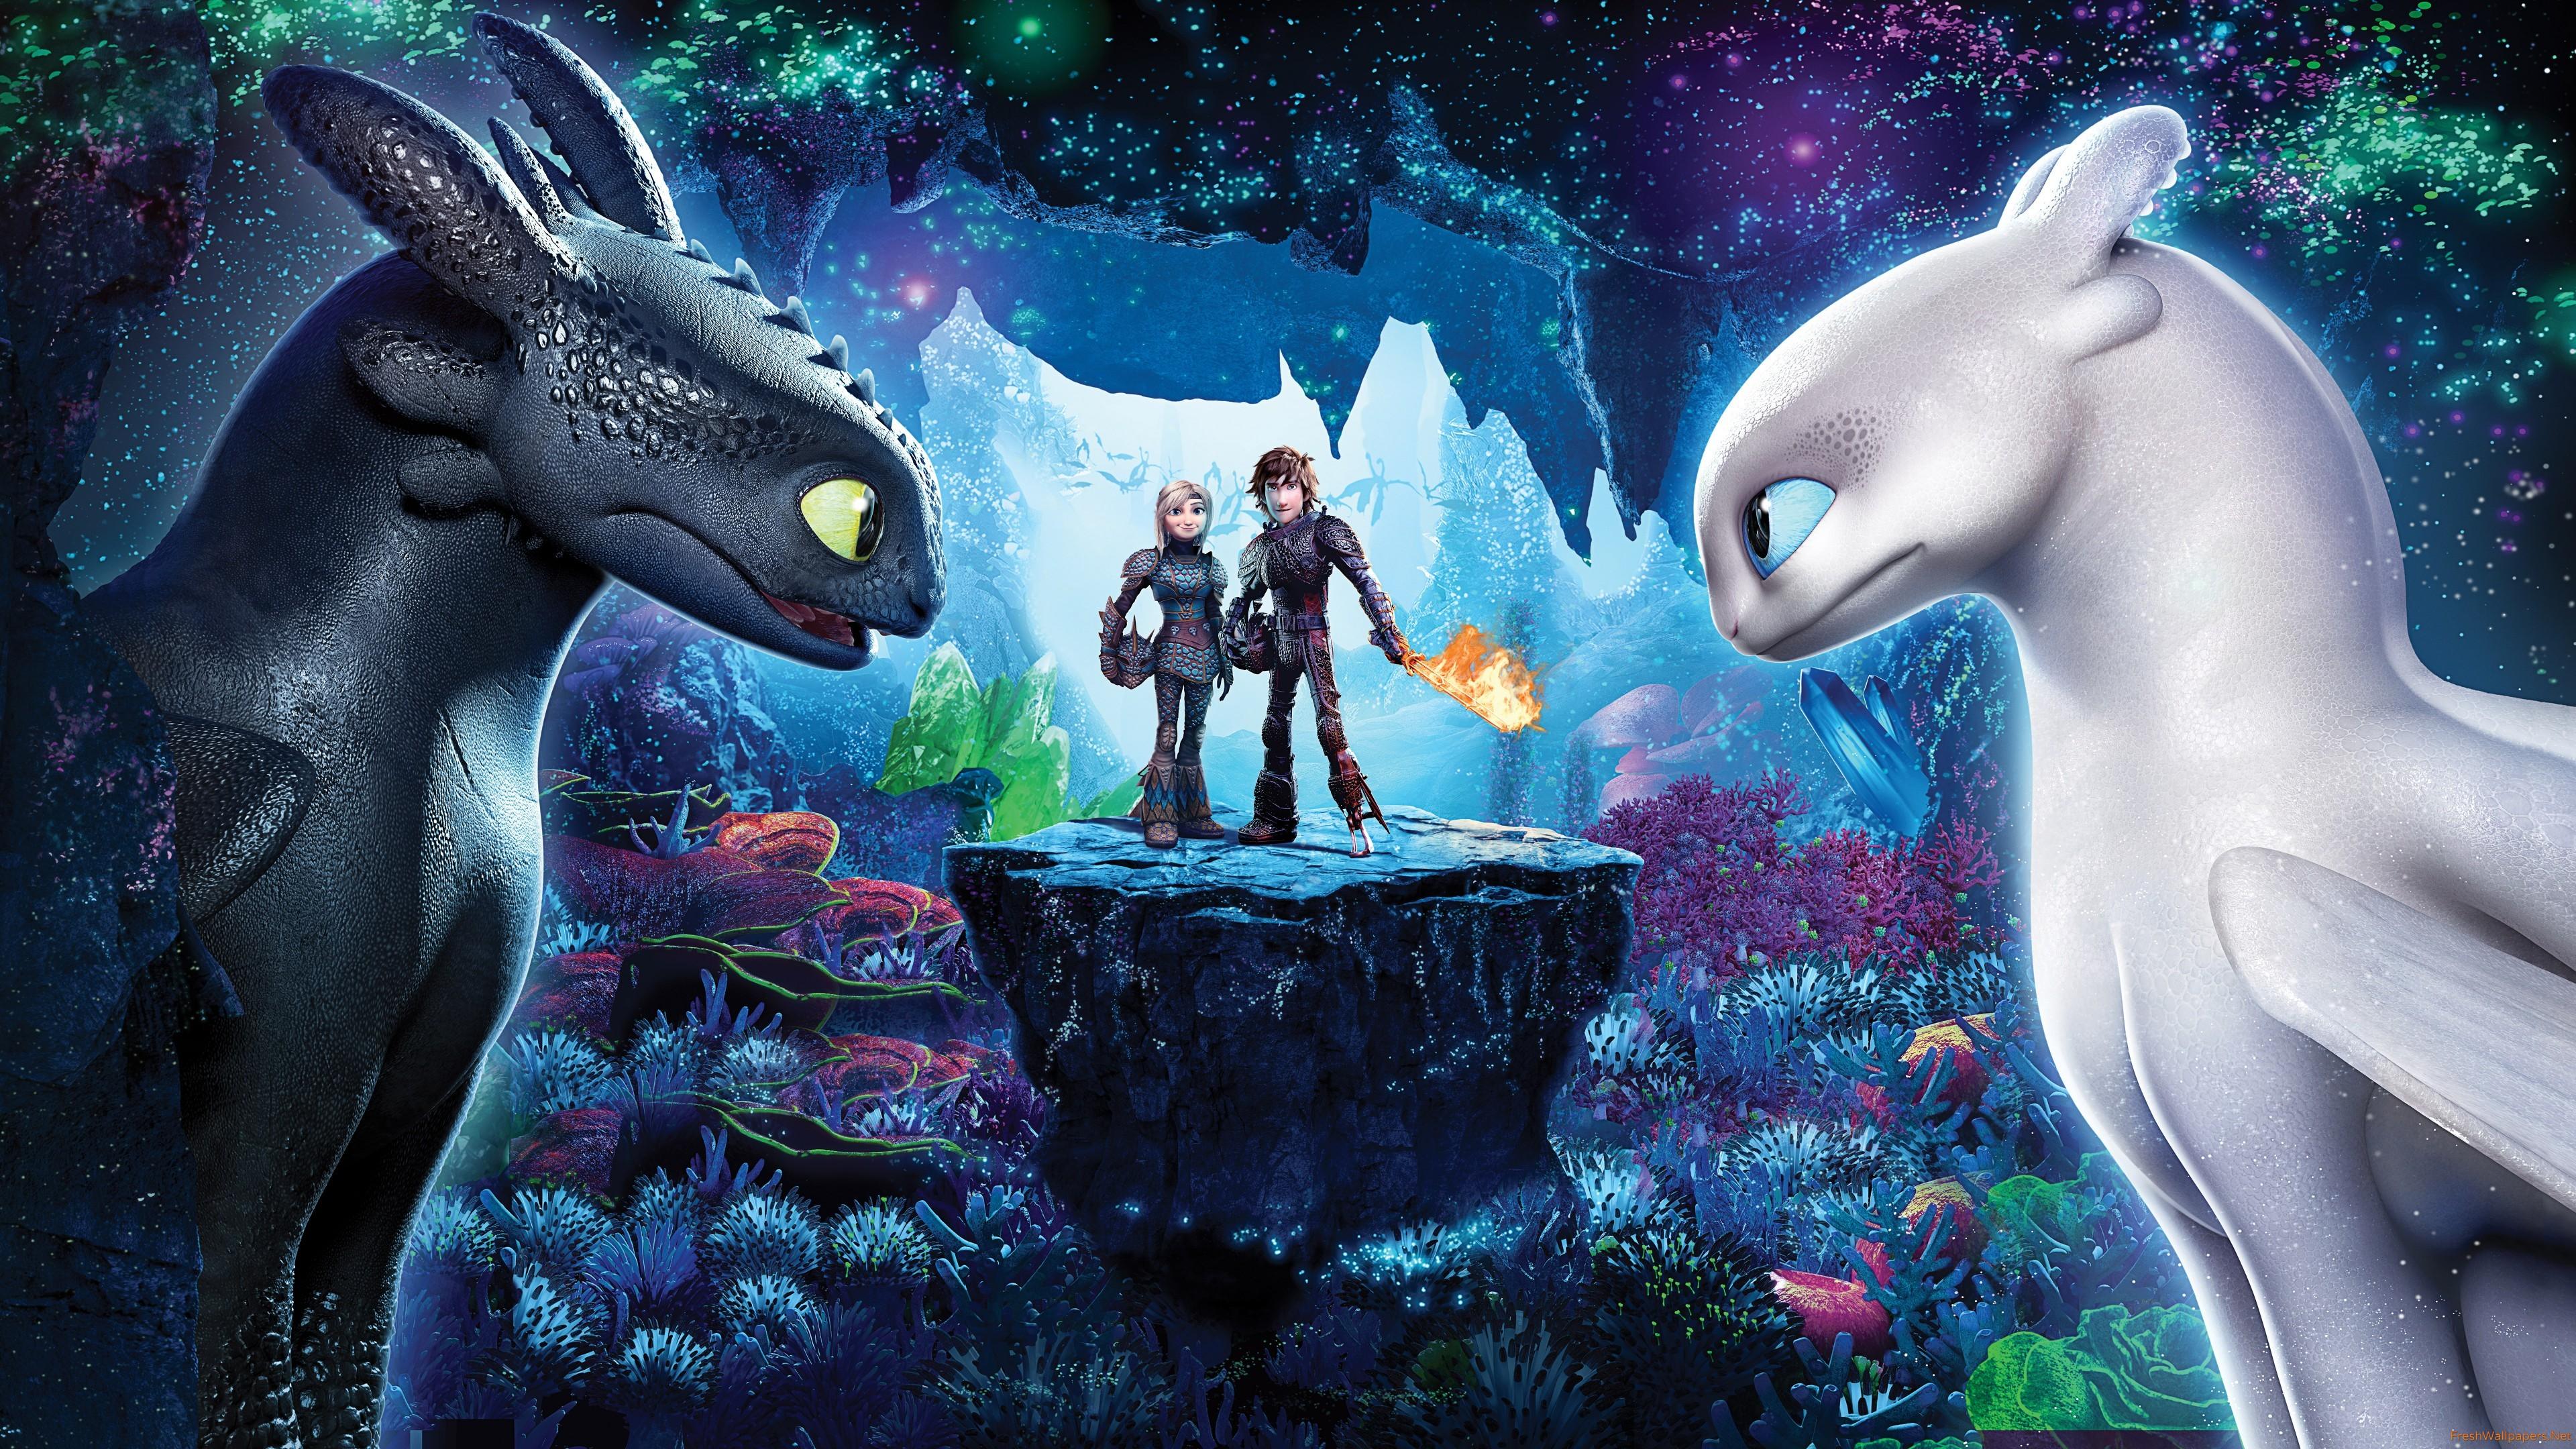 How To Train Your Dragon 3 The Hidden World 4K wallpaper